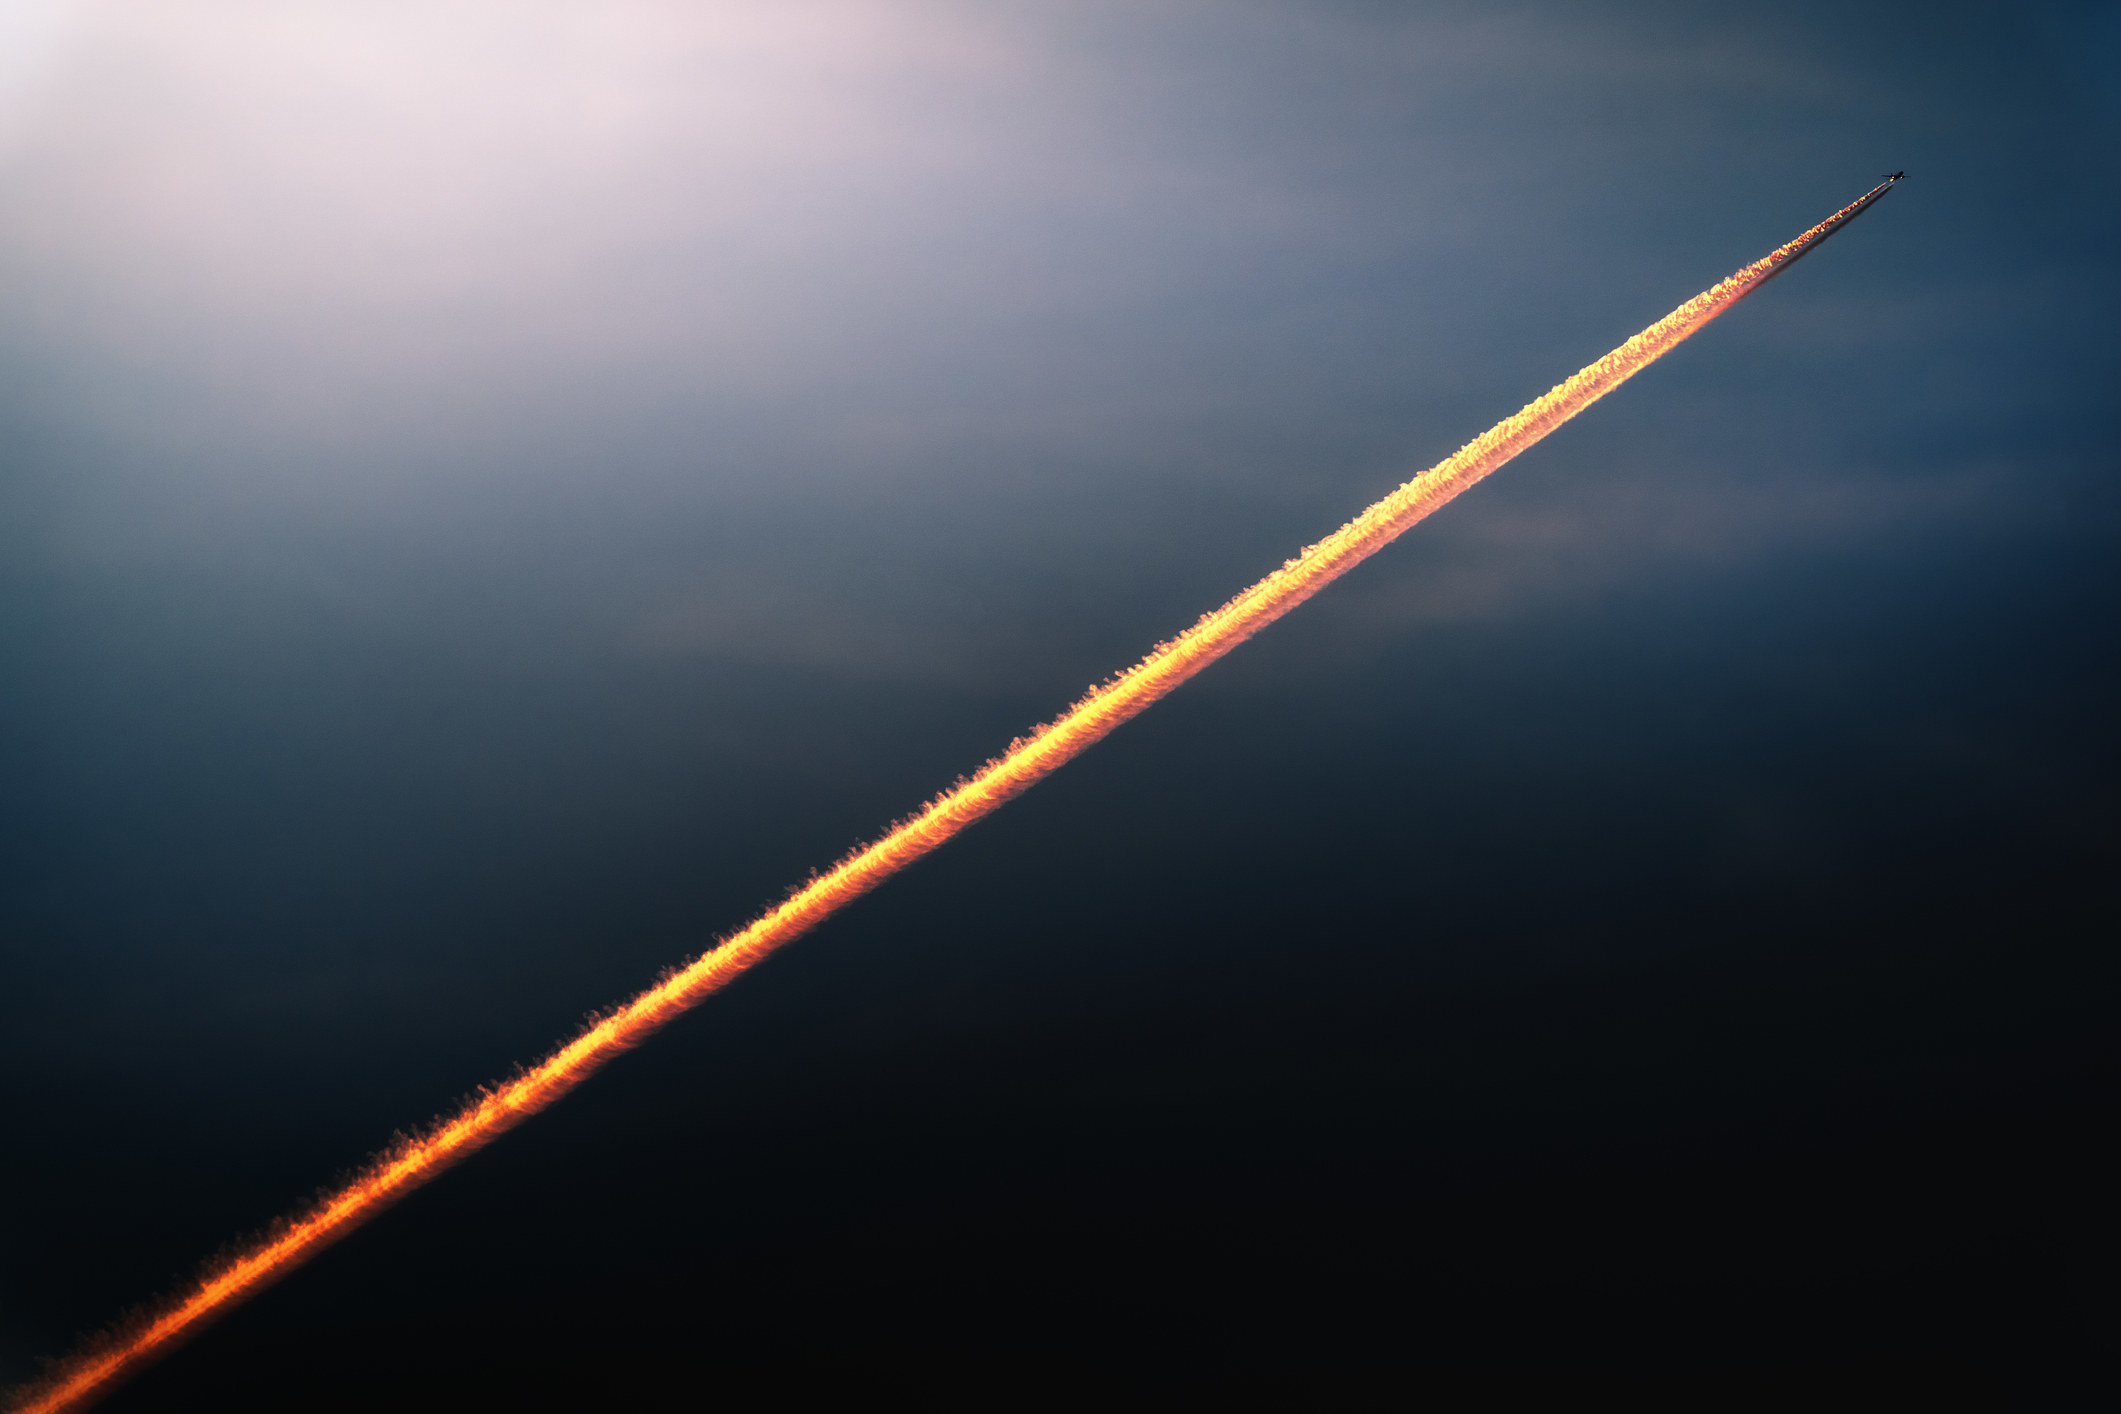 An airplane in high flight and the wake it leaves behind, colored by the sunset light and looking like a rocket